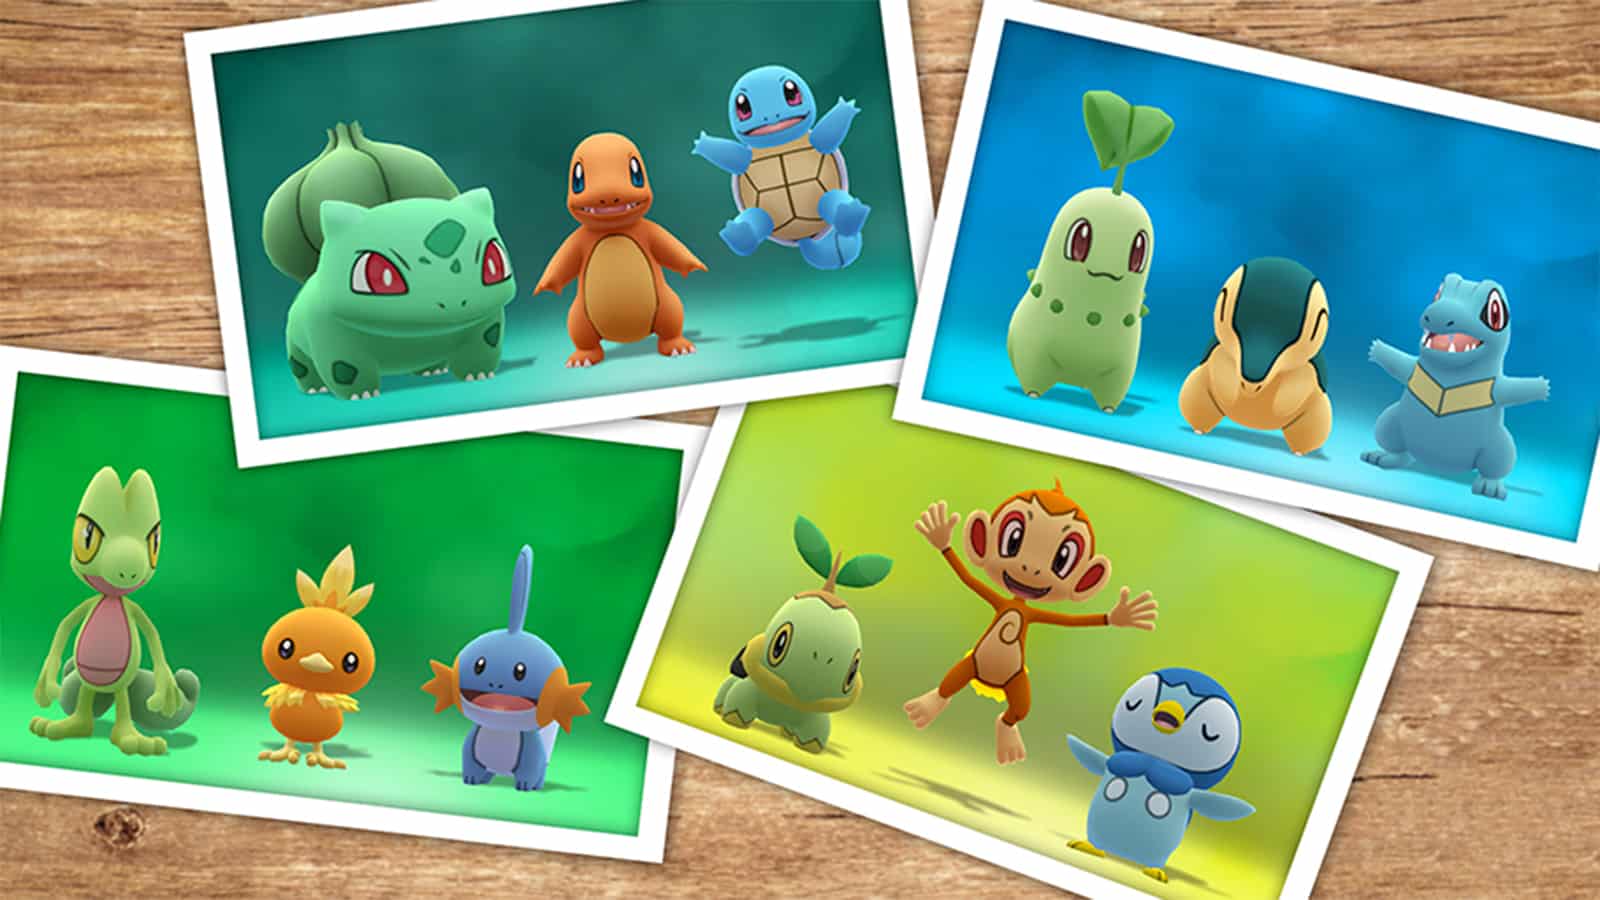 The starters that can learn exclusive moves during Pokemon Go Battle Weekend